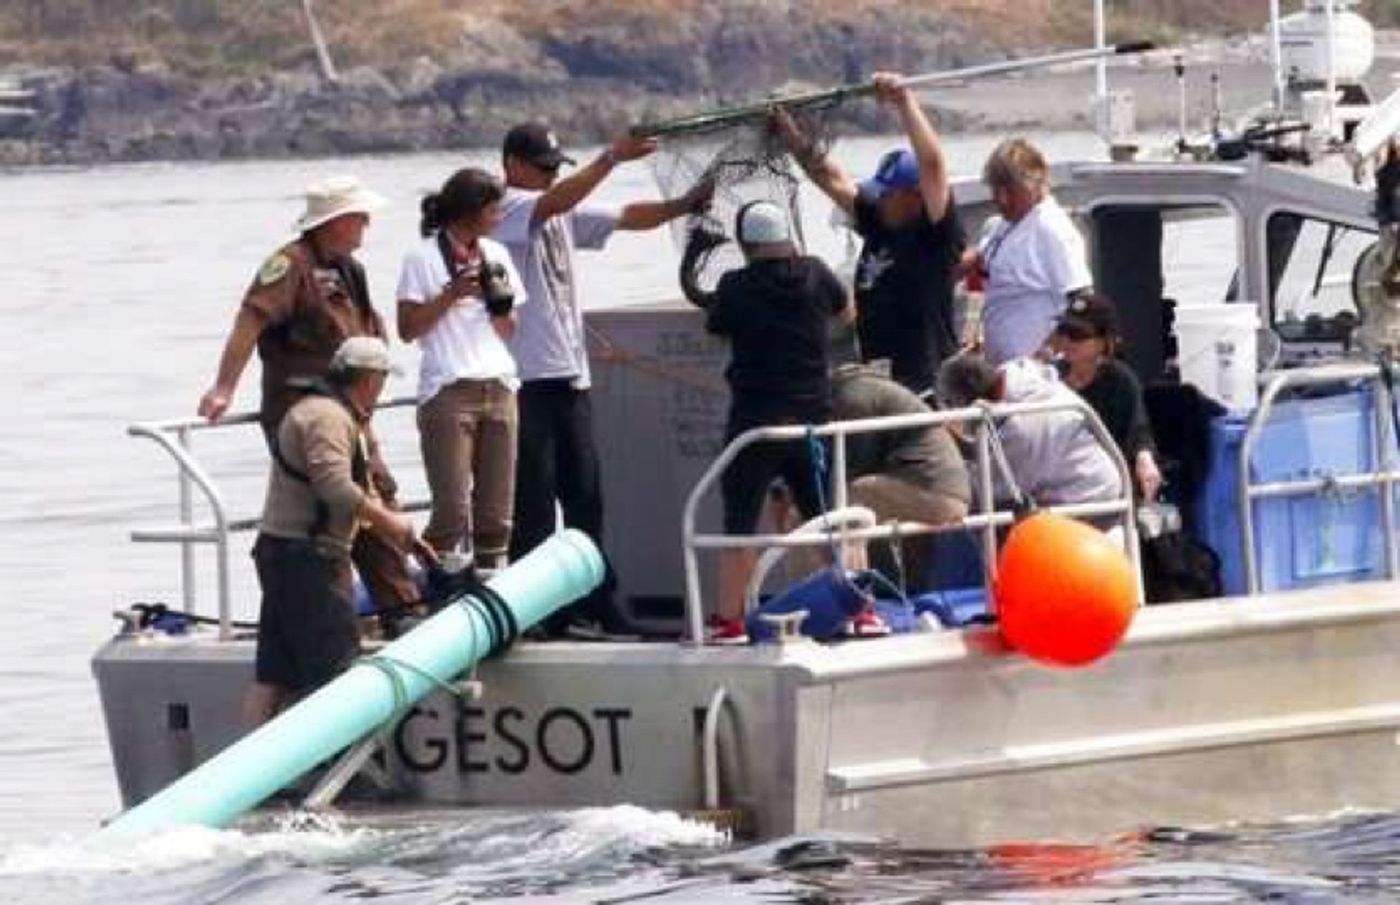 Conservationists with the NOAA attempt to feed J50 live salmon through a plastic pipe on the back of their boat.